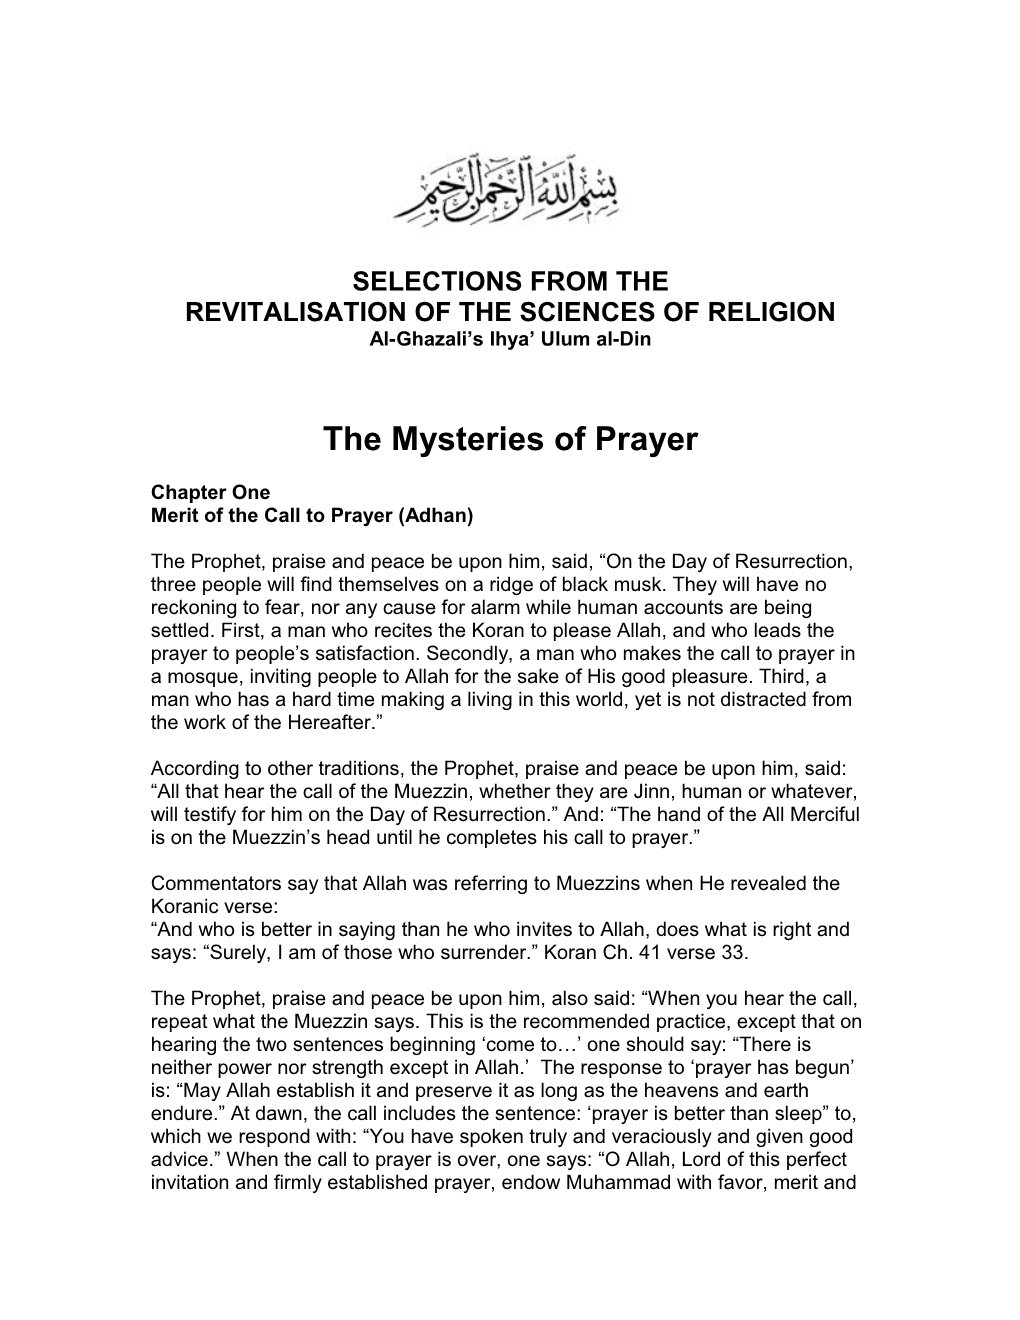 Revitalisation of the Sciences of Religion